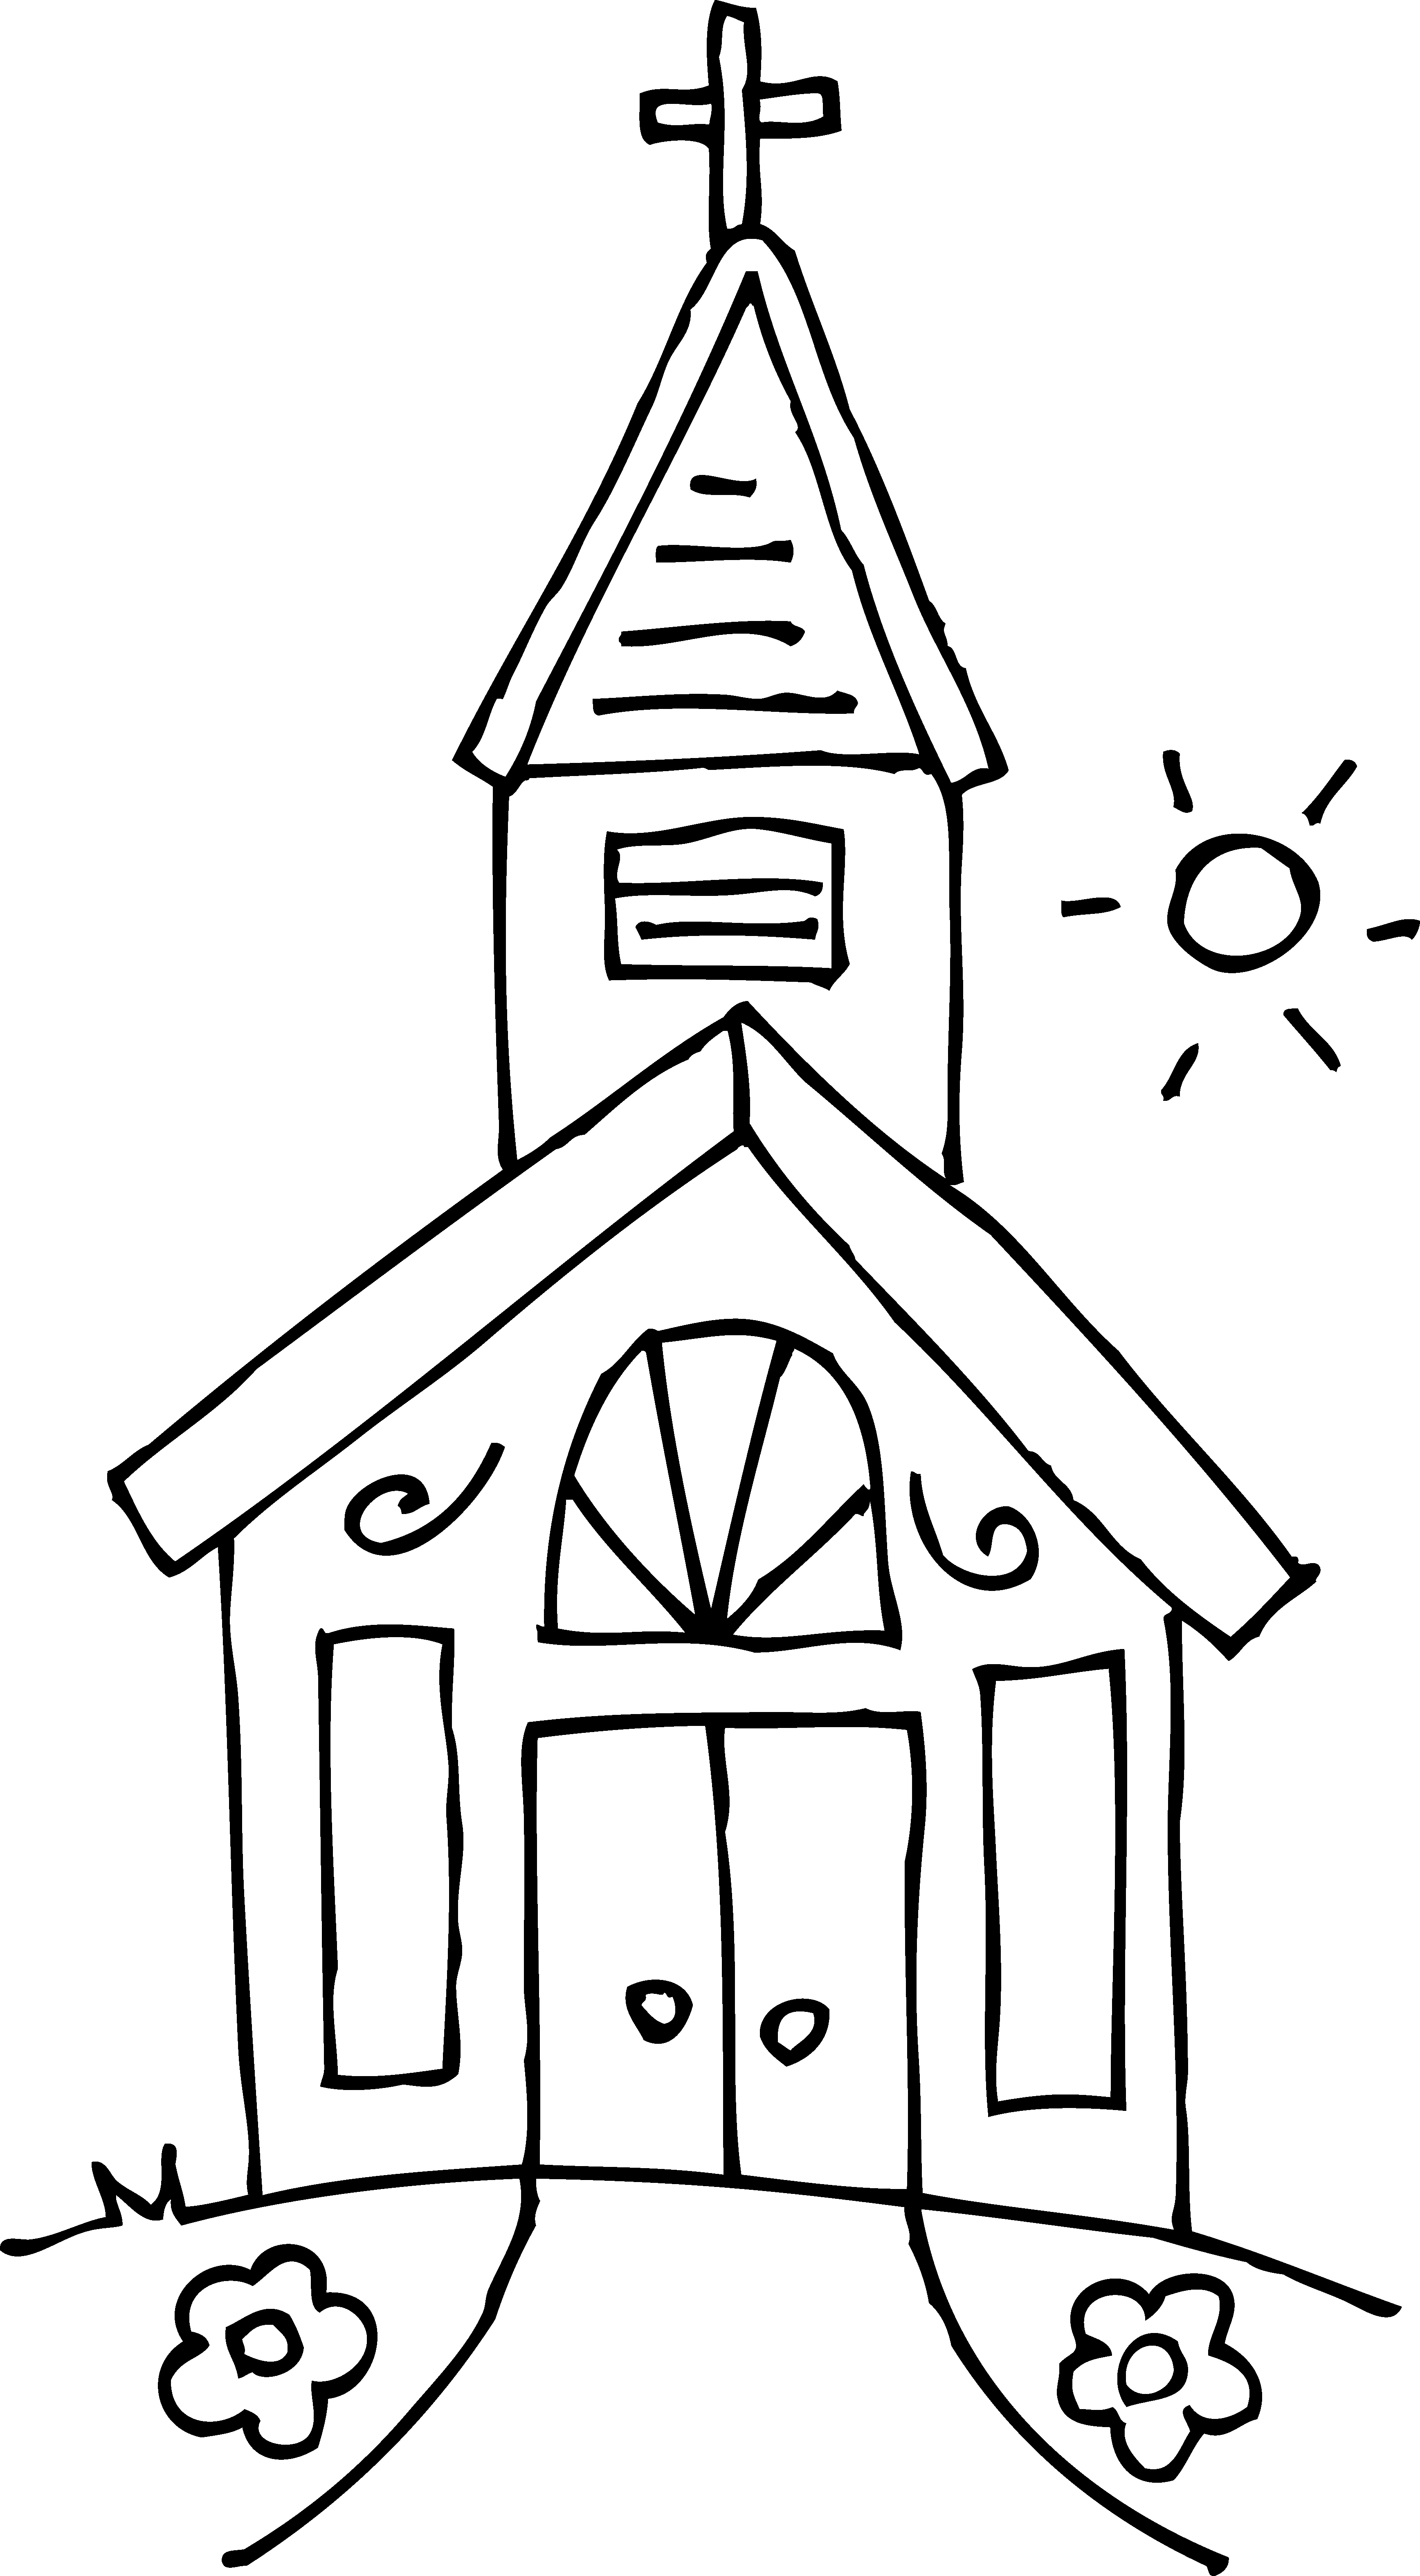 Lds church clipart black and white 